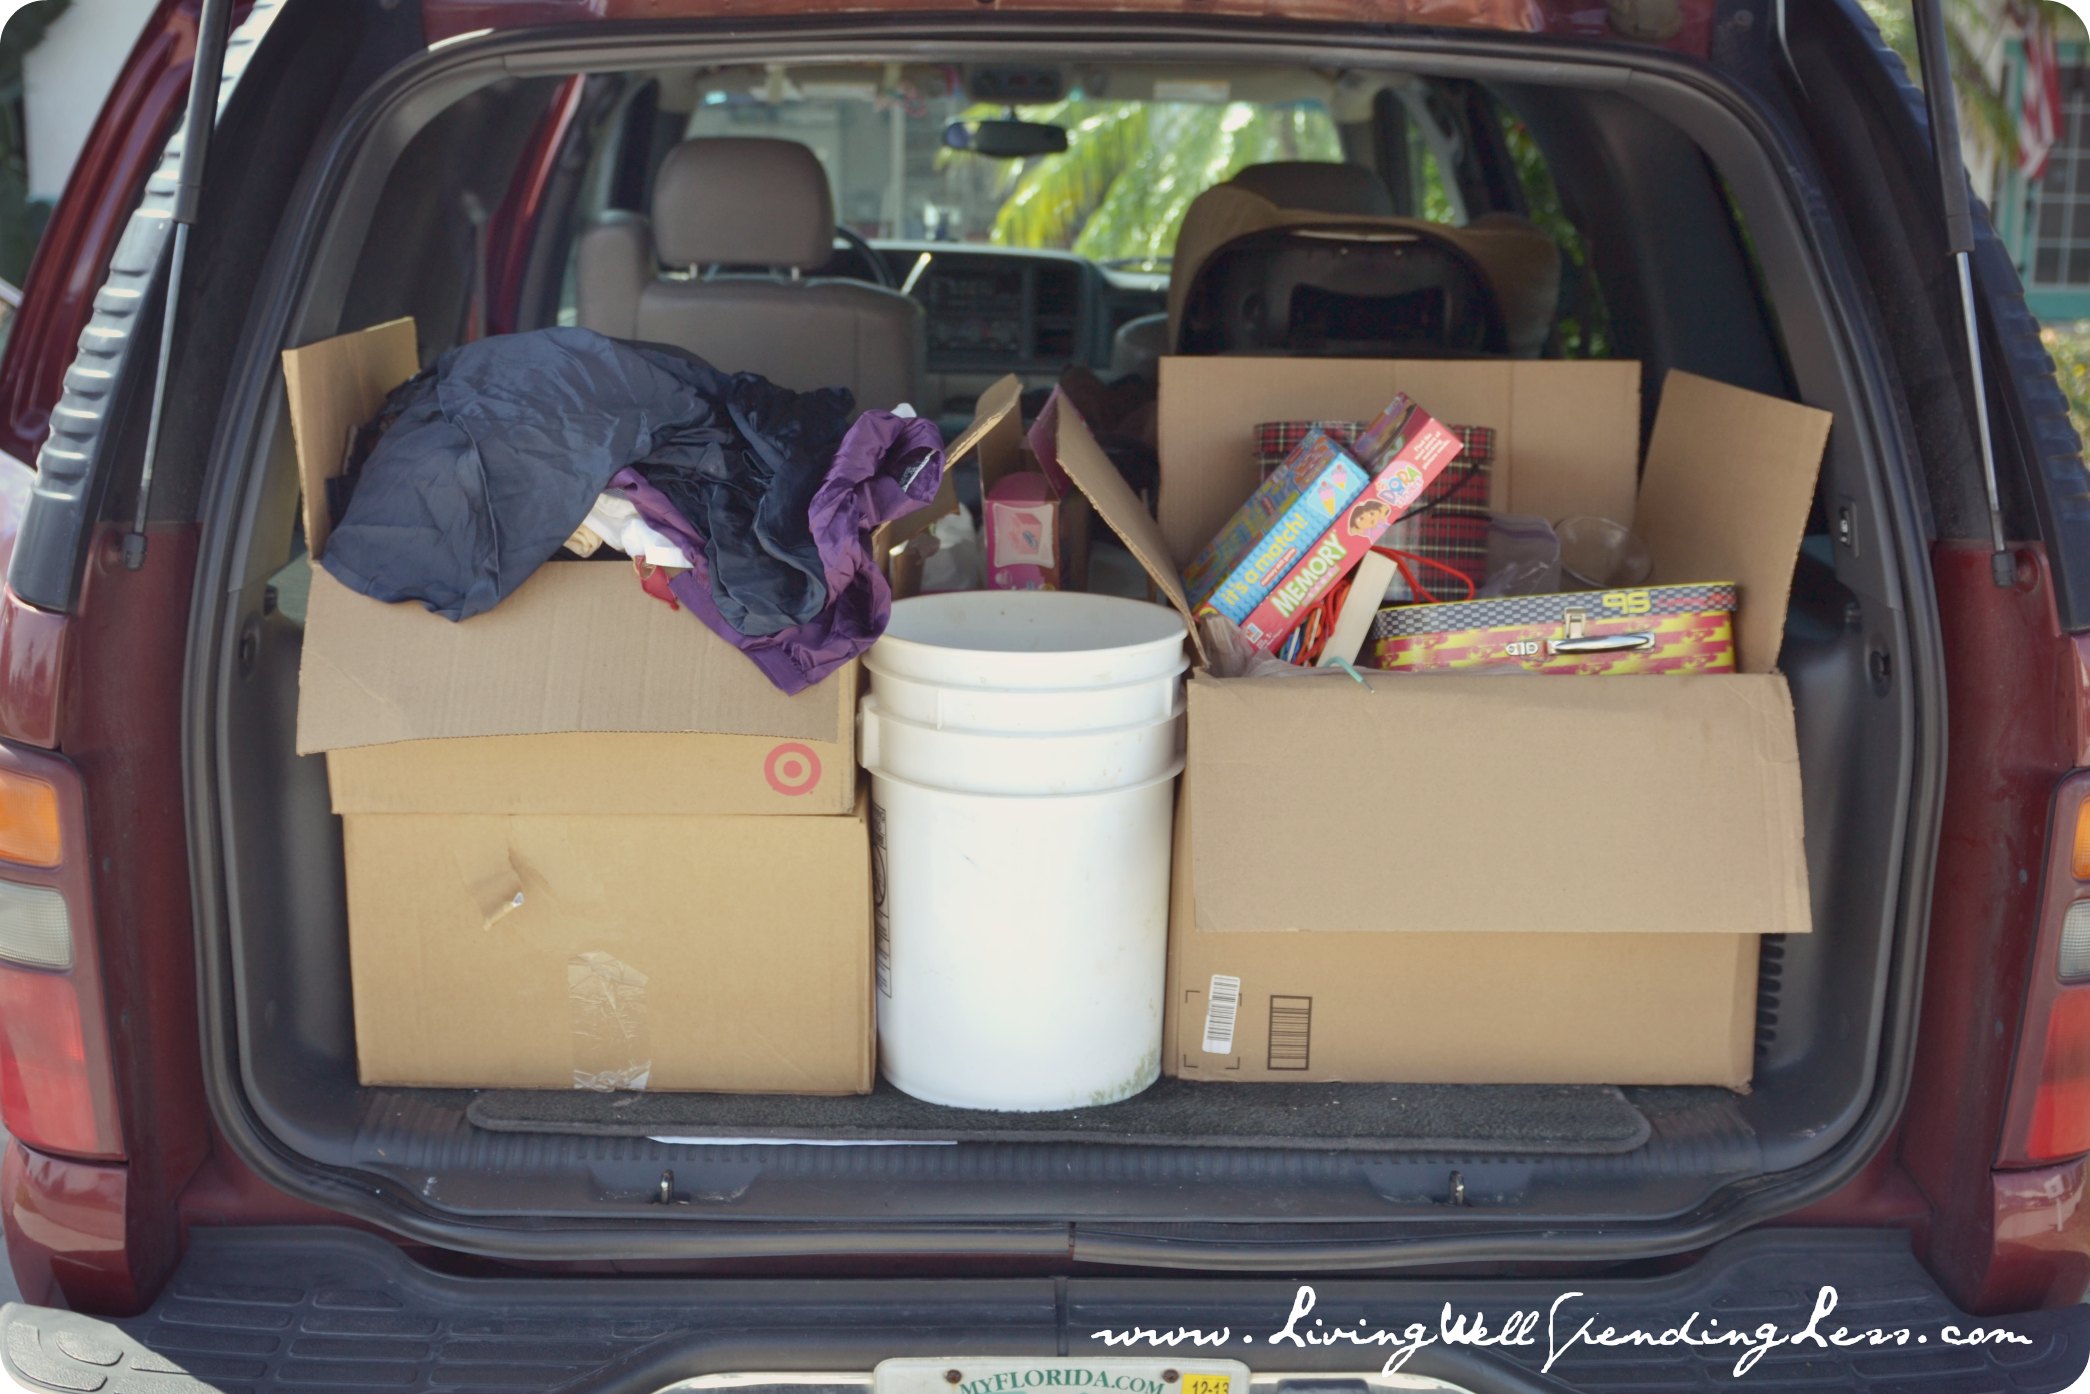 Pack up your clutter, put it in boxes, load it in the car and drive it to the nearest donation station. Clearing clutter can help you appreciate your space and gives it an instant update.